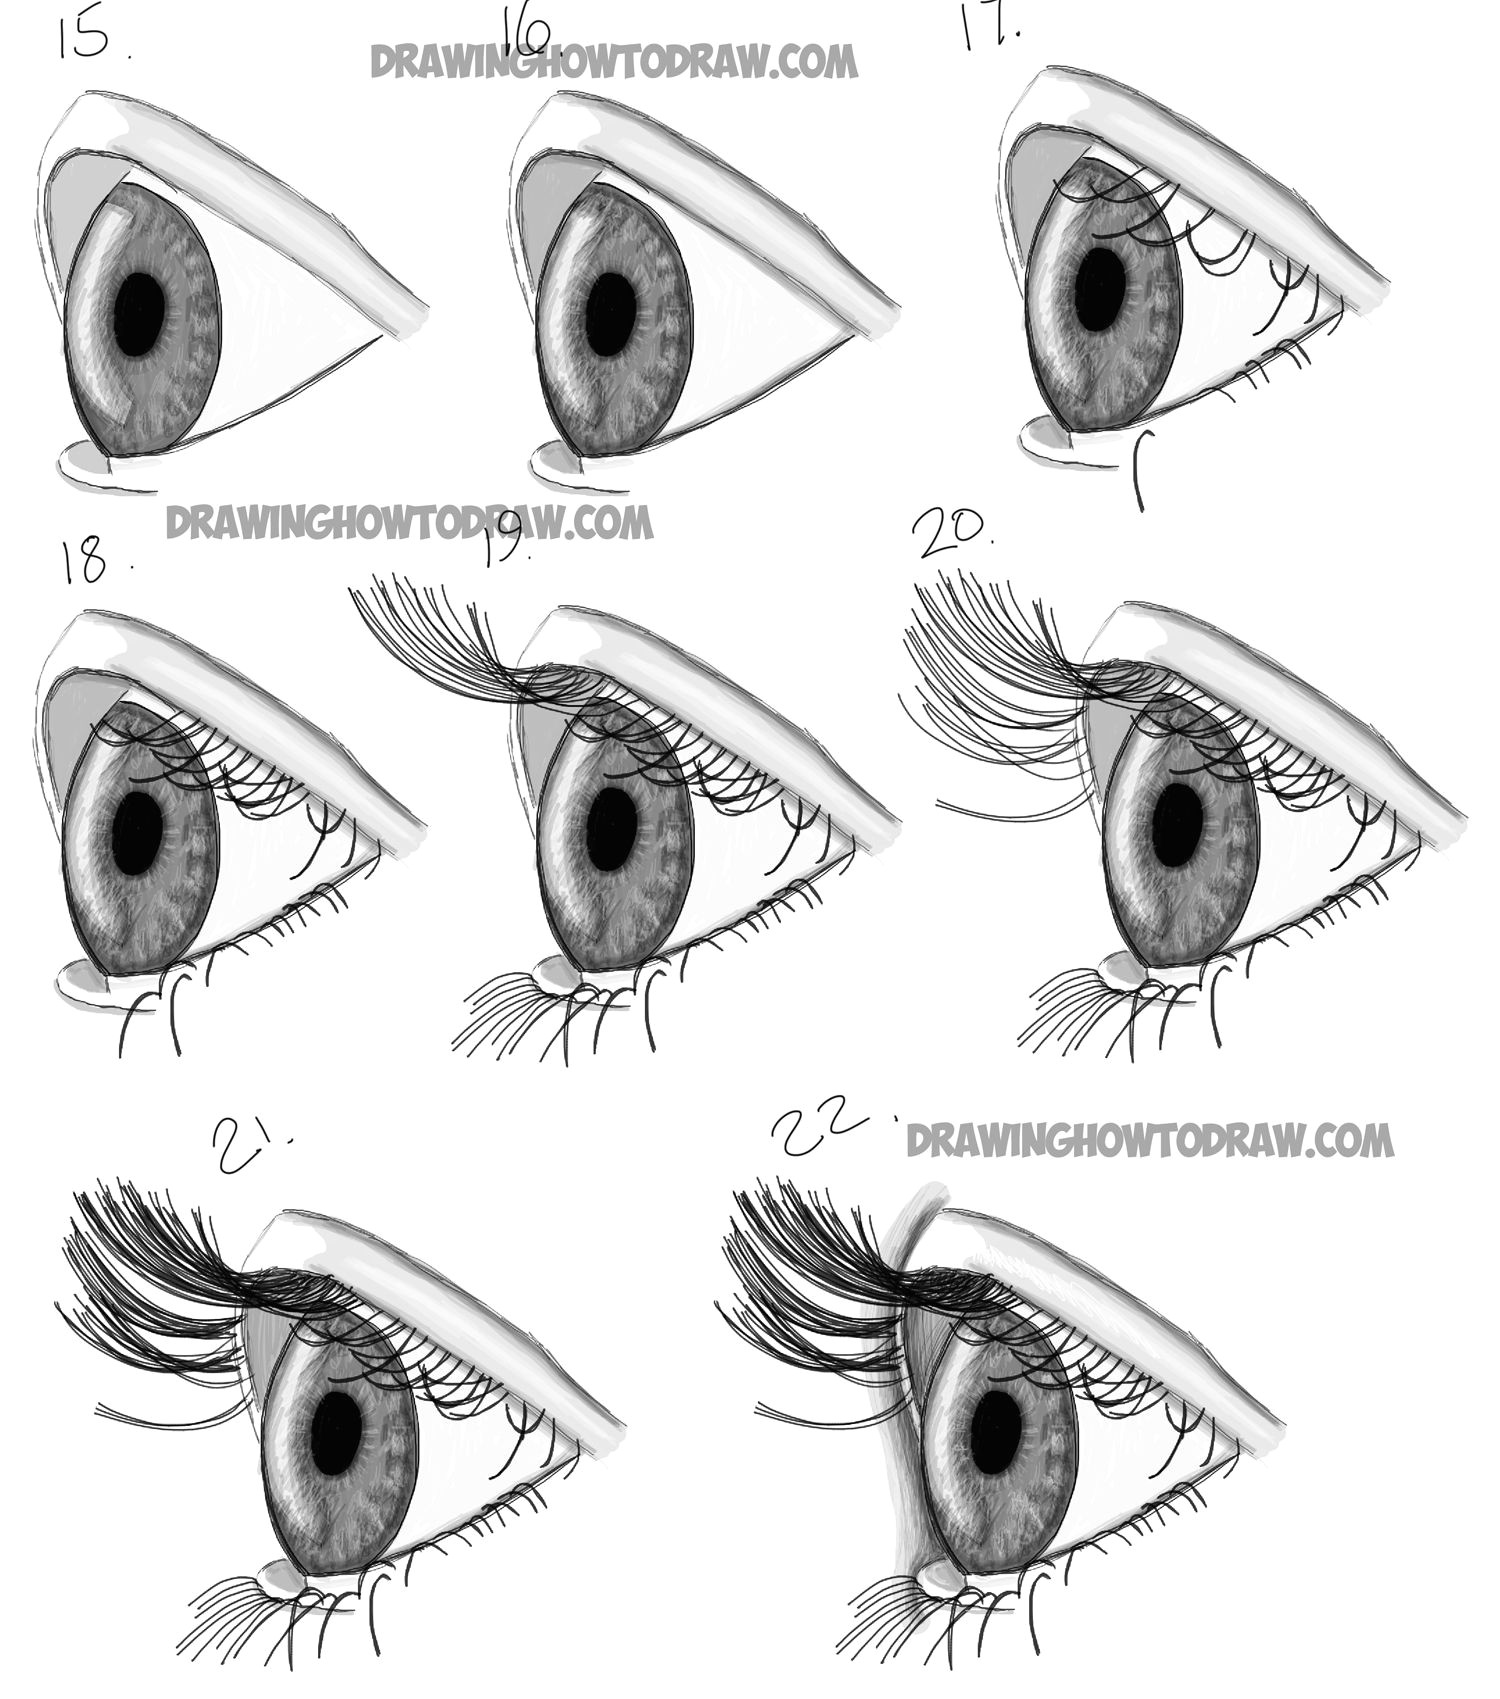 Drawing Eye Perspective How to Draw Realistic Eyes From the Side Profile View Step by Step